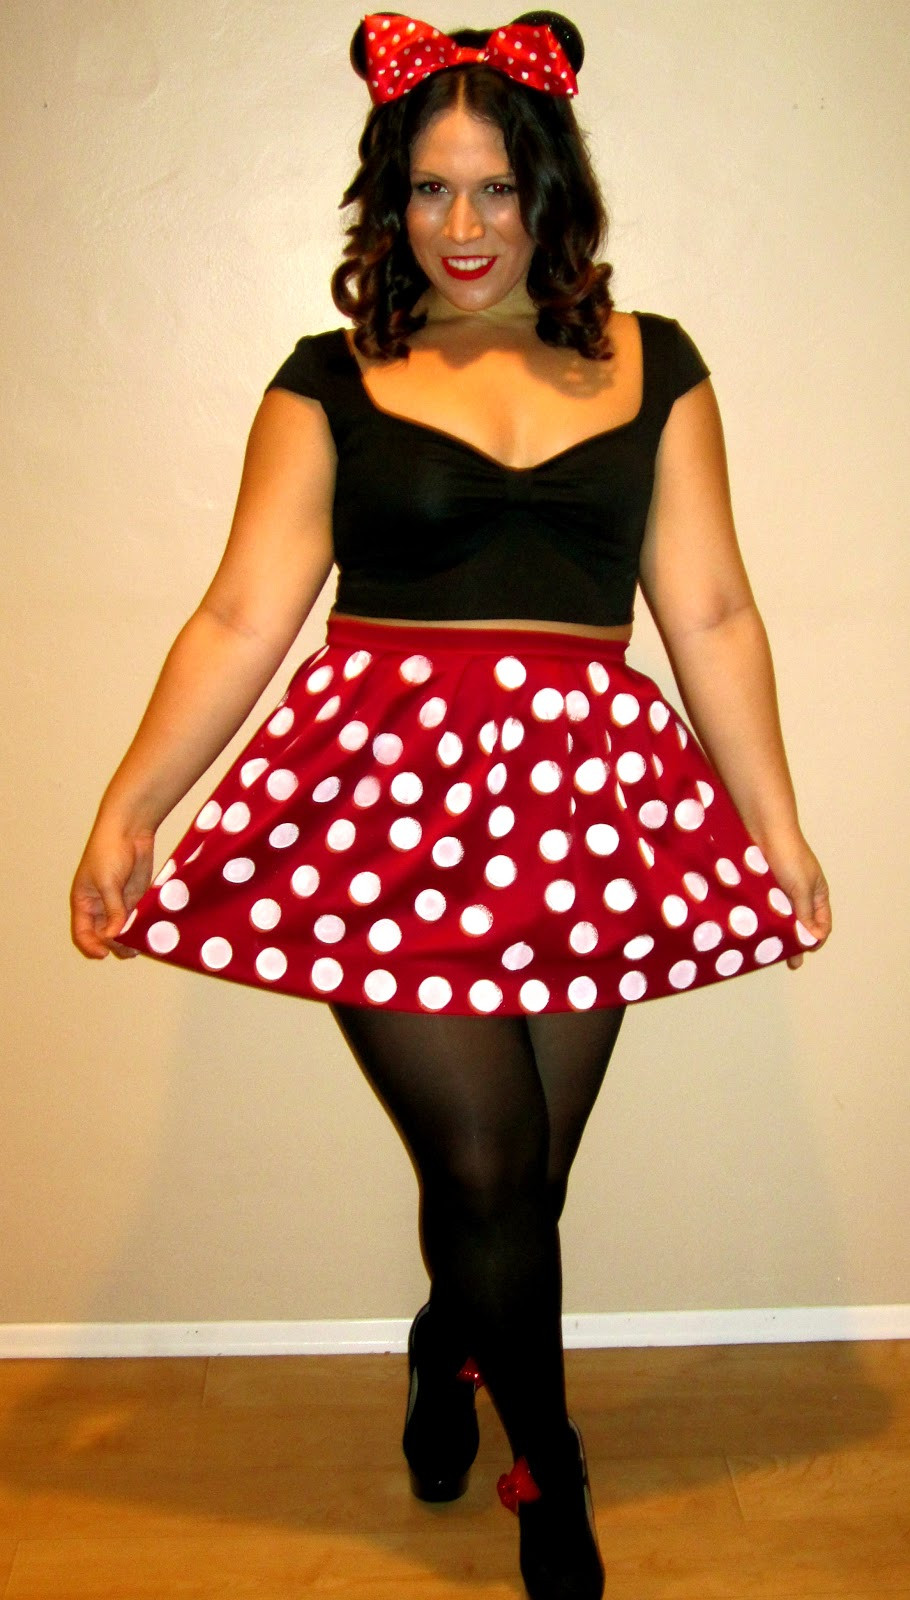 DIY Minnie Mouse Costume For Adults
 So Happy I Could DIY